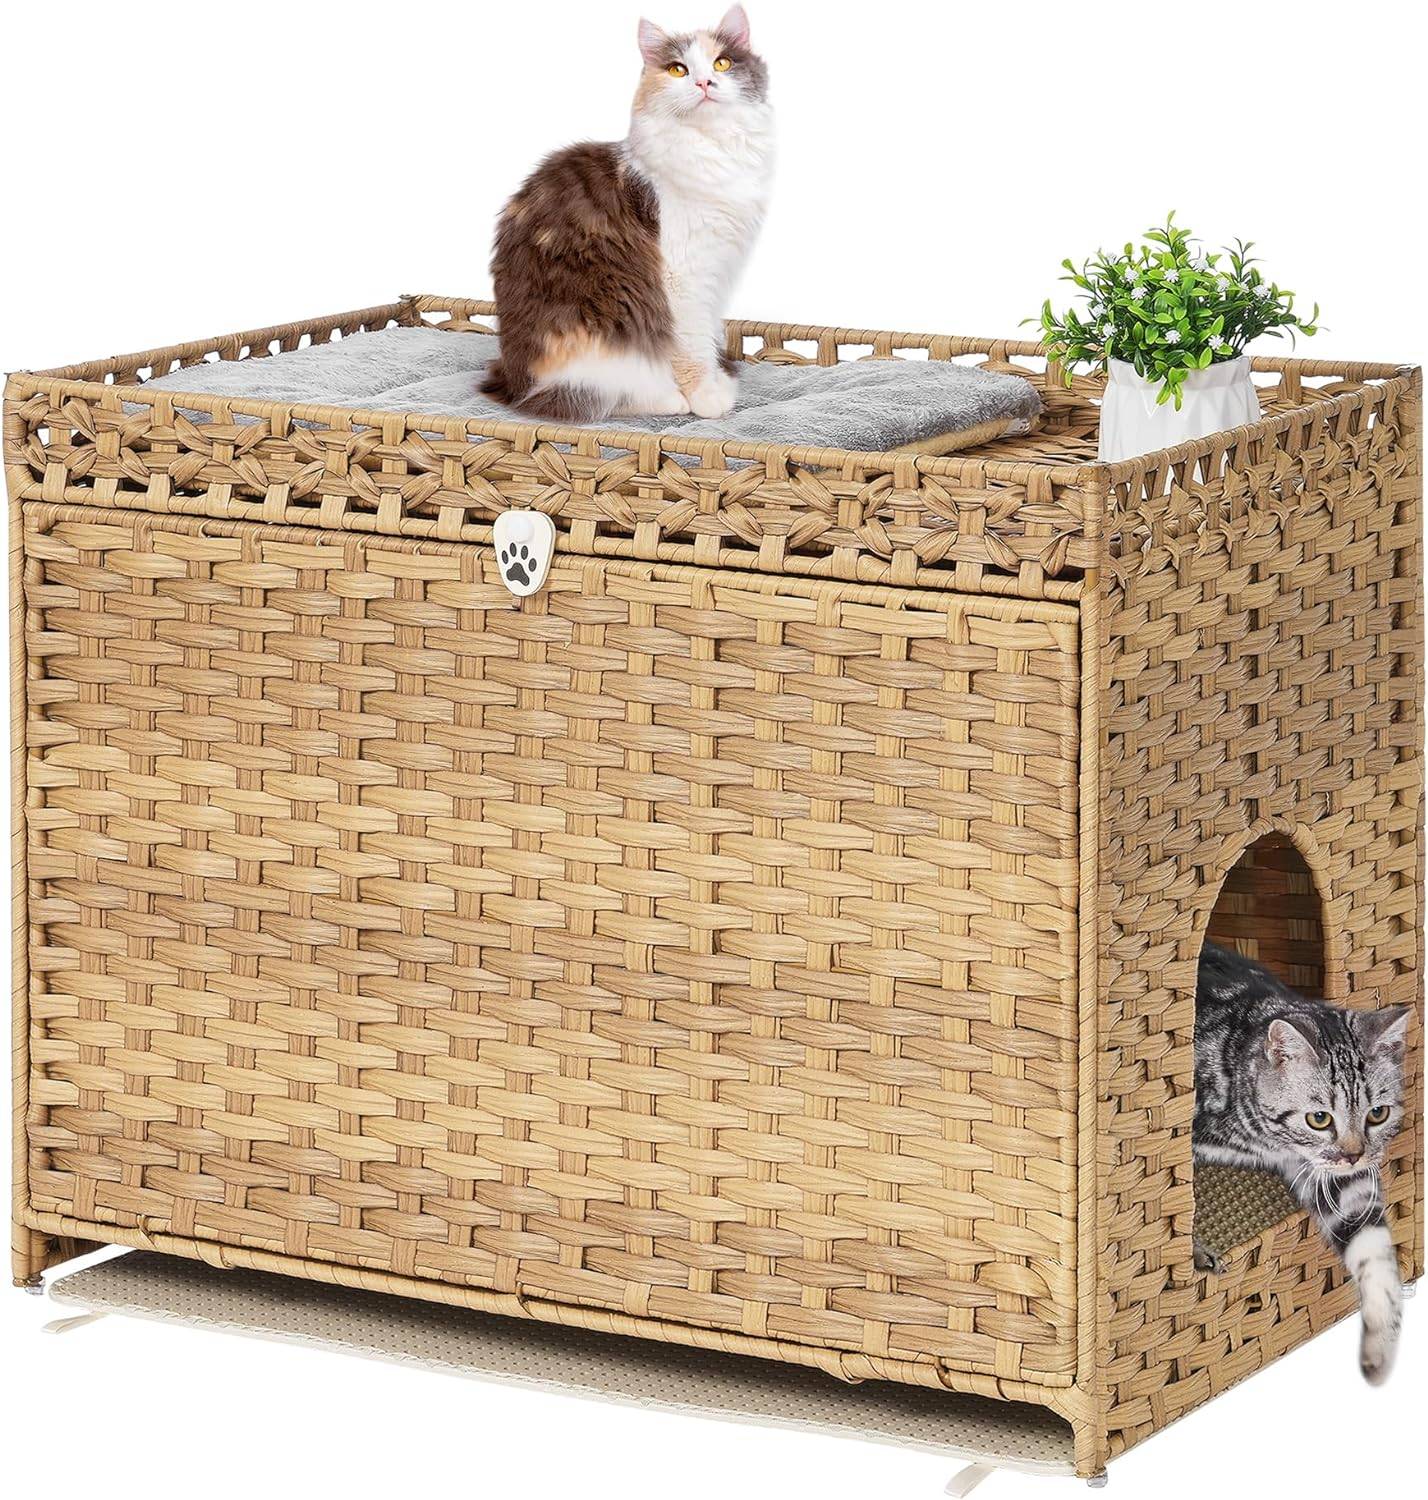 Wicker box that doubles as a litter box for cats.